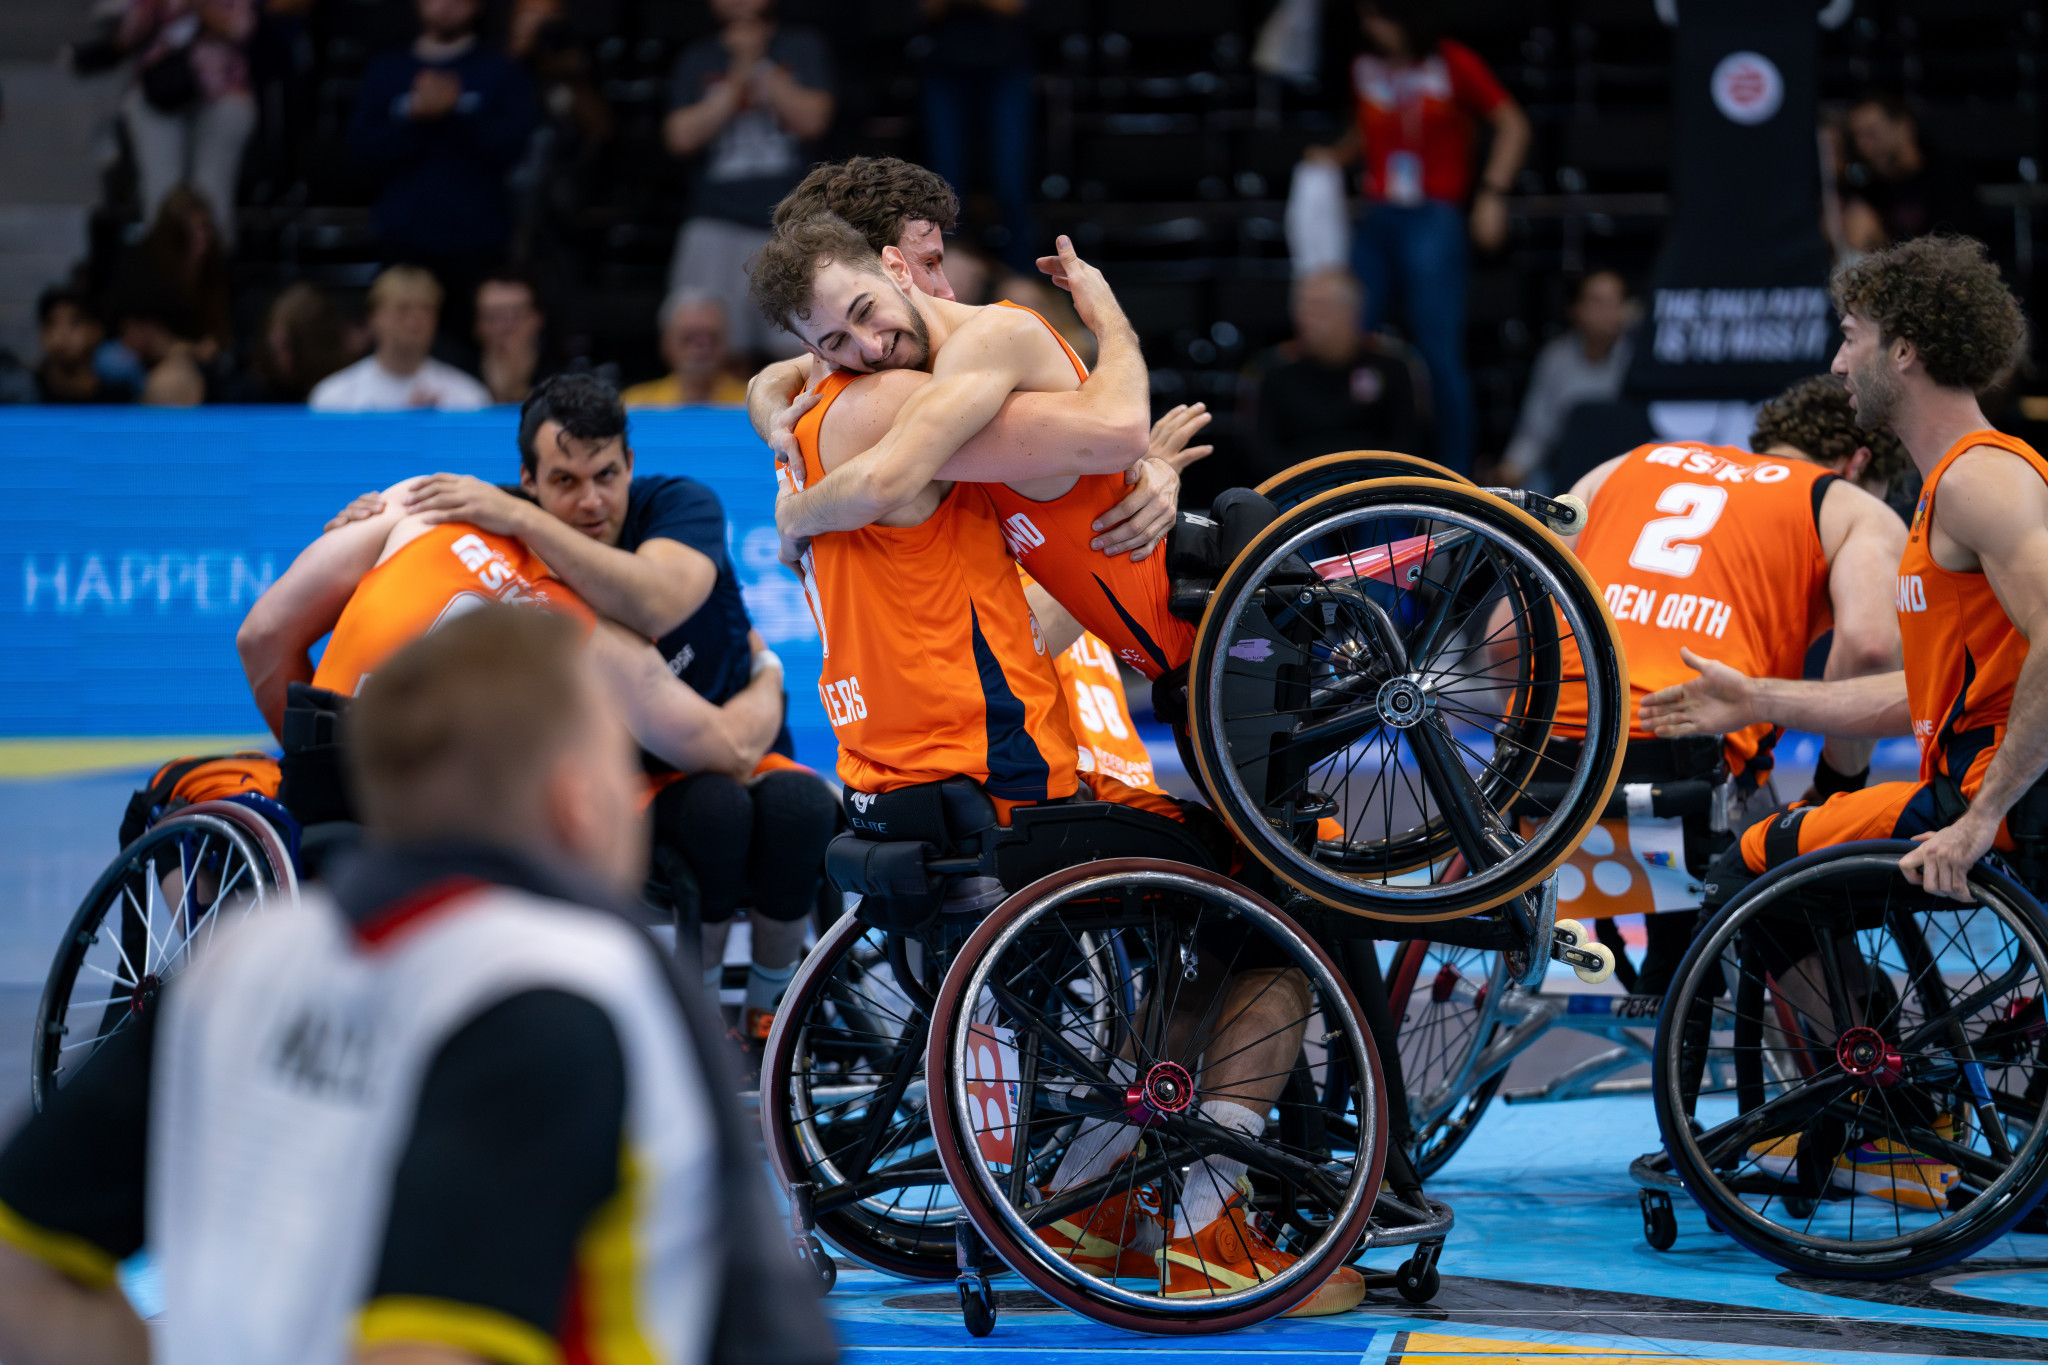 The Netherlands bounced back from their disappointing semi-final defeat to seal bronze with a 58-51 win against Germany ©EPC